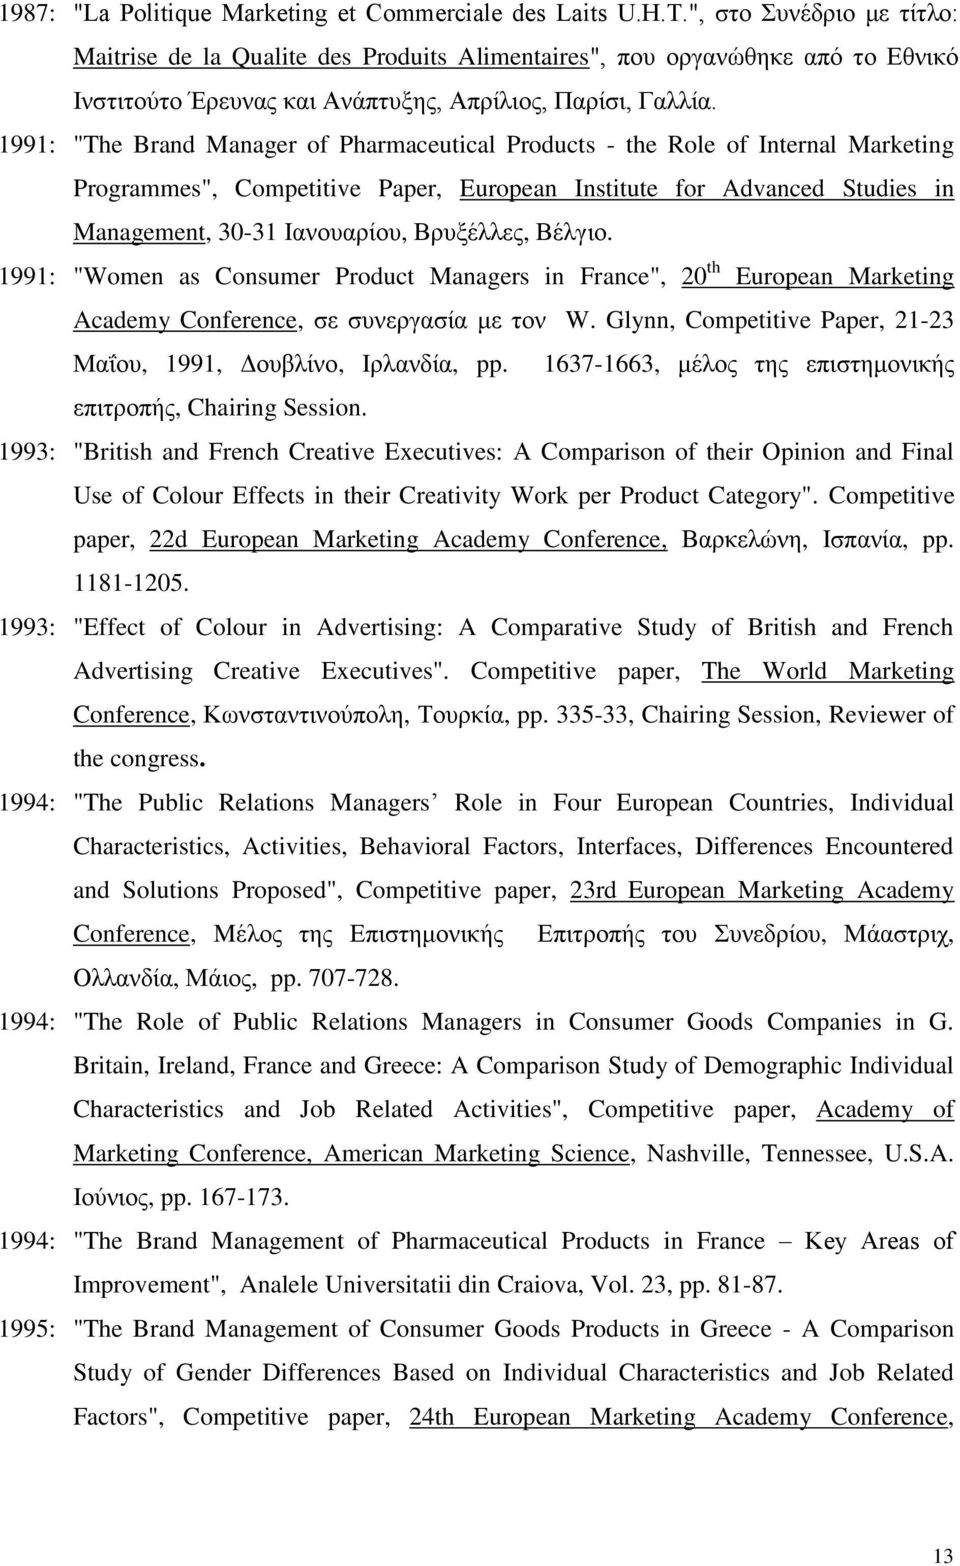 1991: "The Brand Manager of Pharmaceutical Products - the Role of Internal Marketing Programmes", Competitive Paper, European Institute for Advanced Studies in Management, 30-31 Ιανουαρίου,